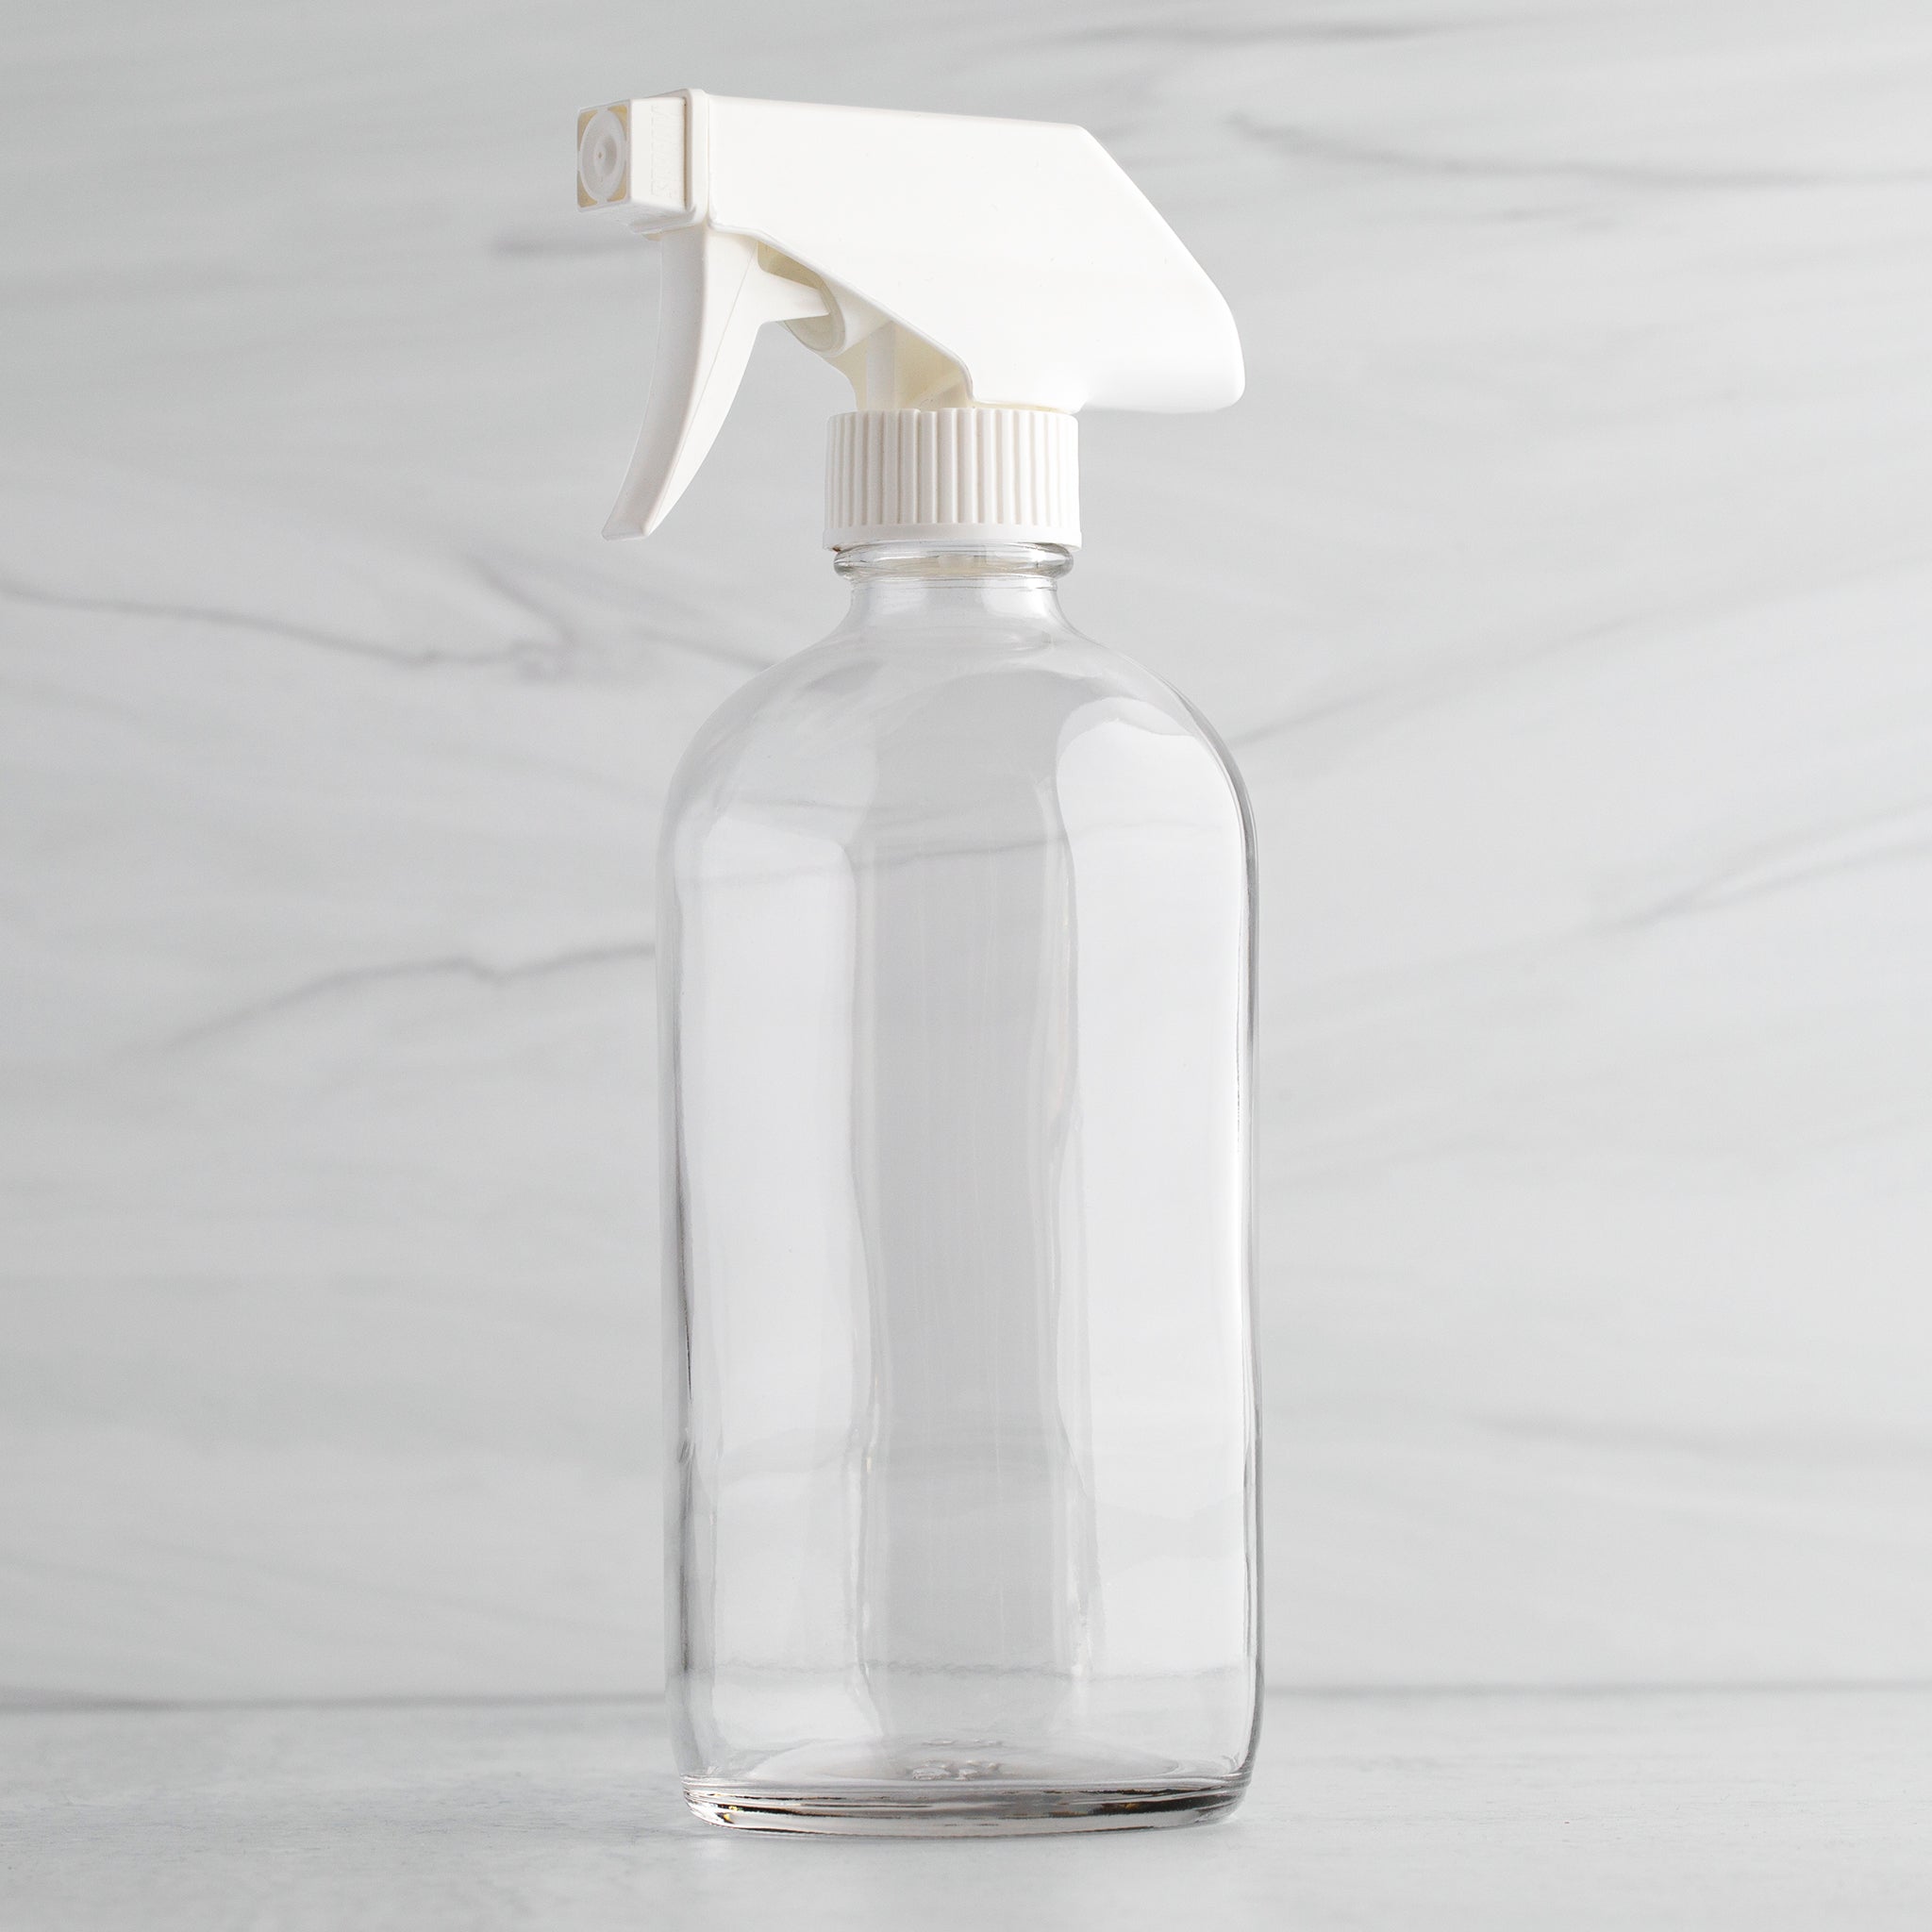 16 oz Clear Glass Bottle with White Trigger Sprayer